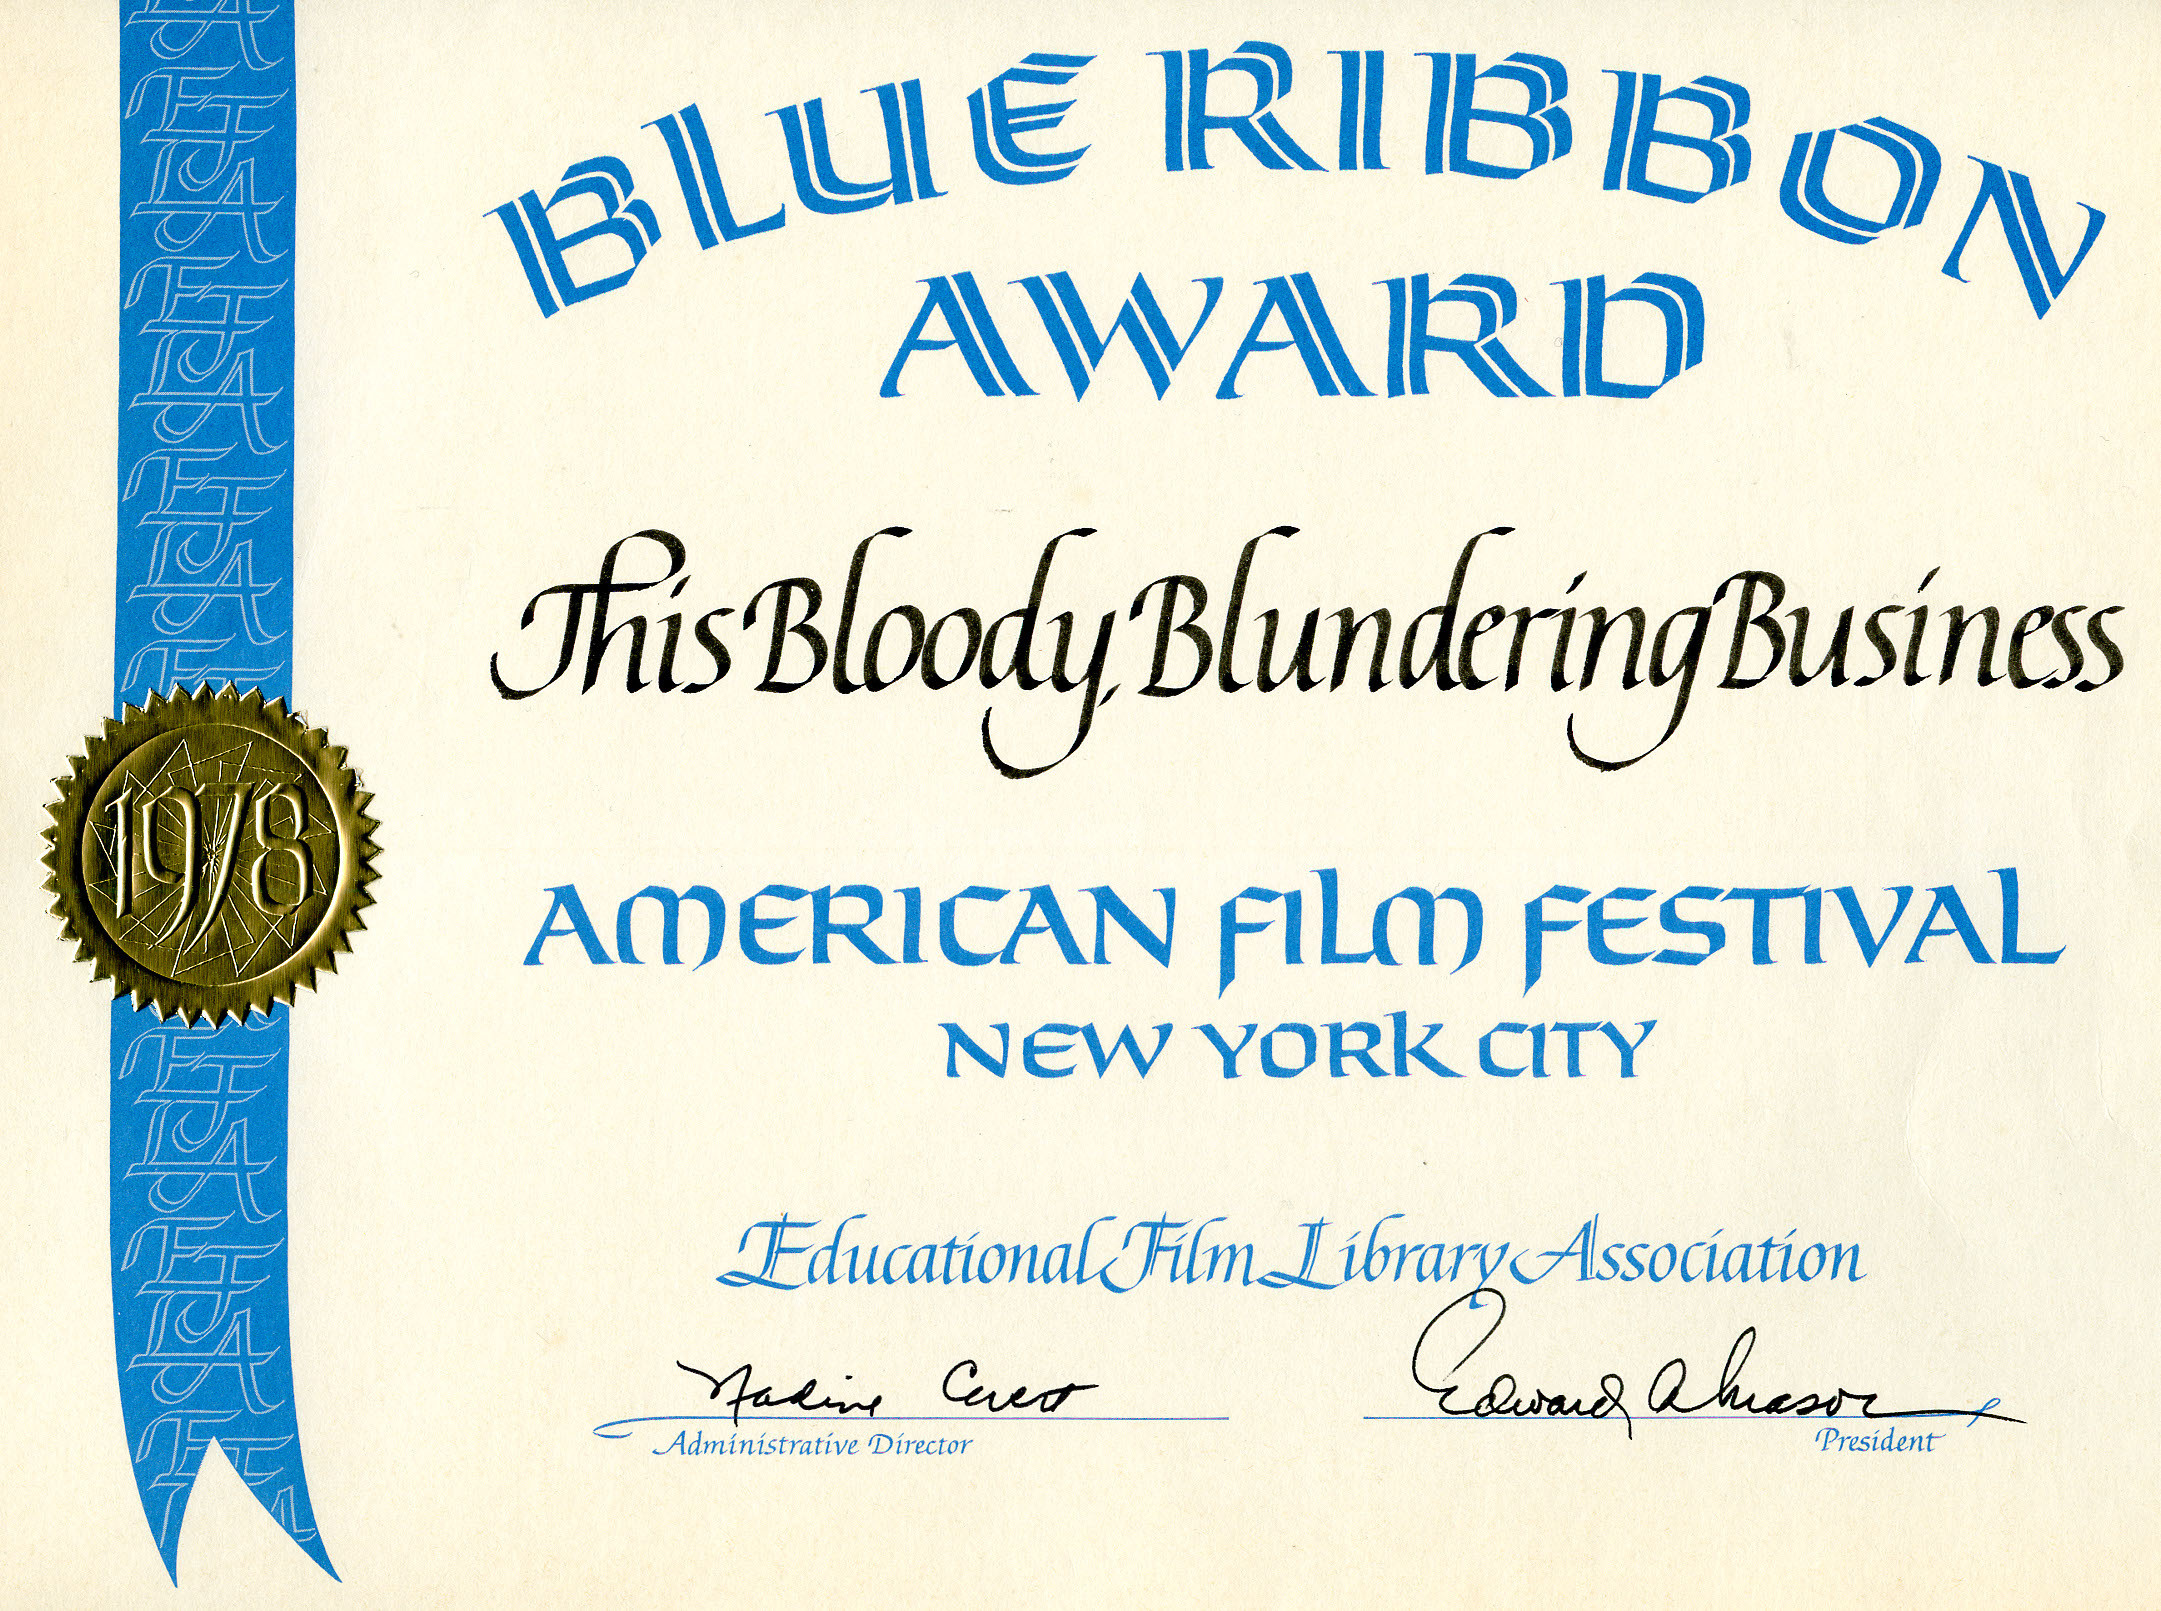 This Bloody Blundering Business - Blue Ribbon Award.